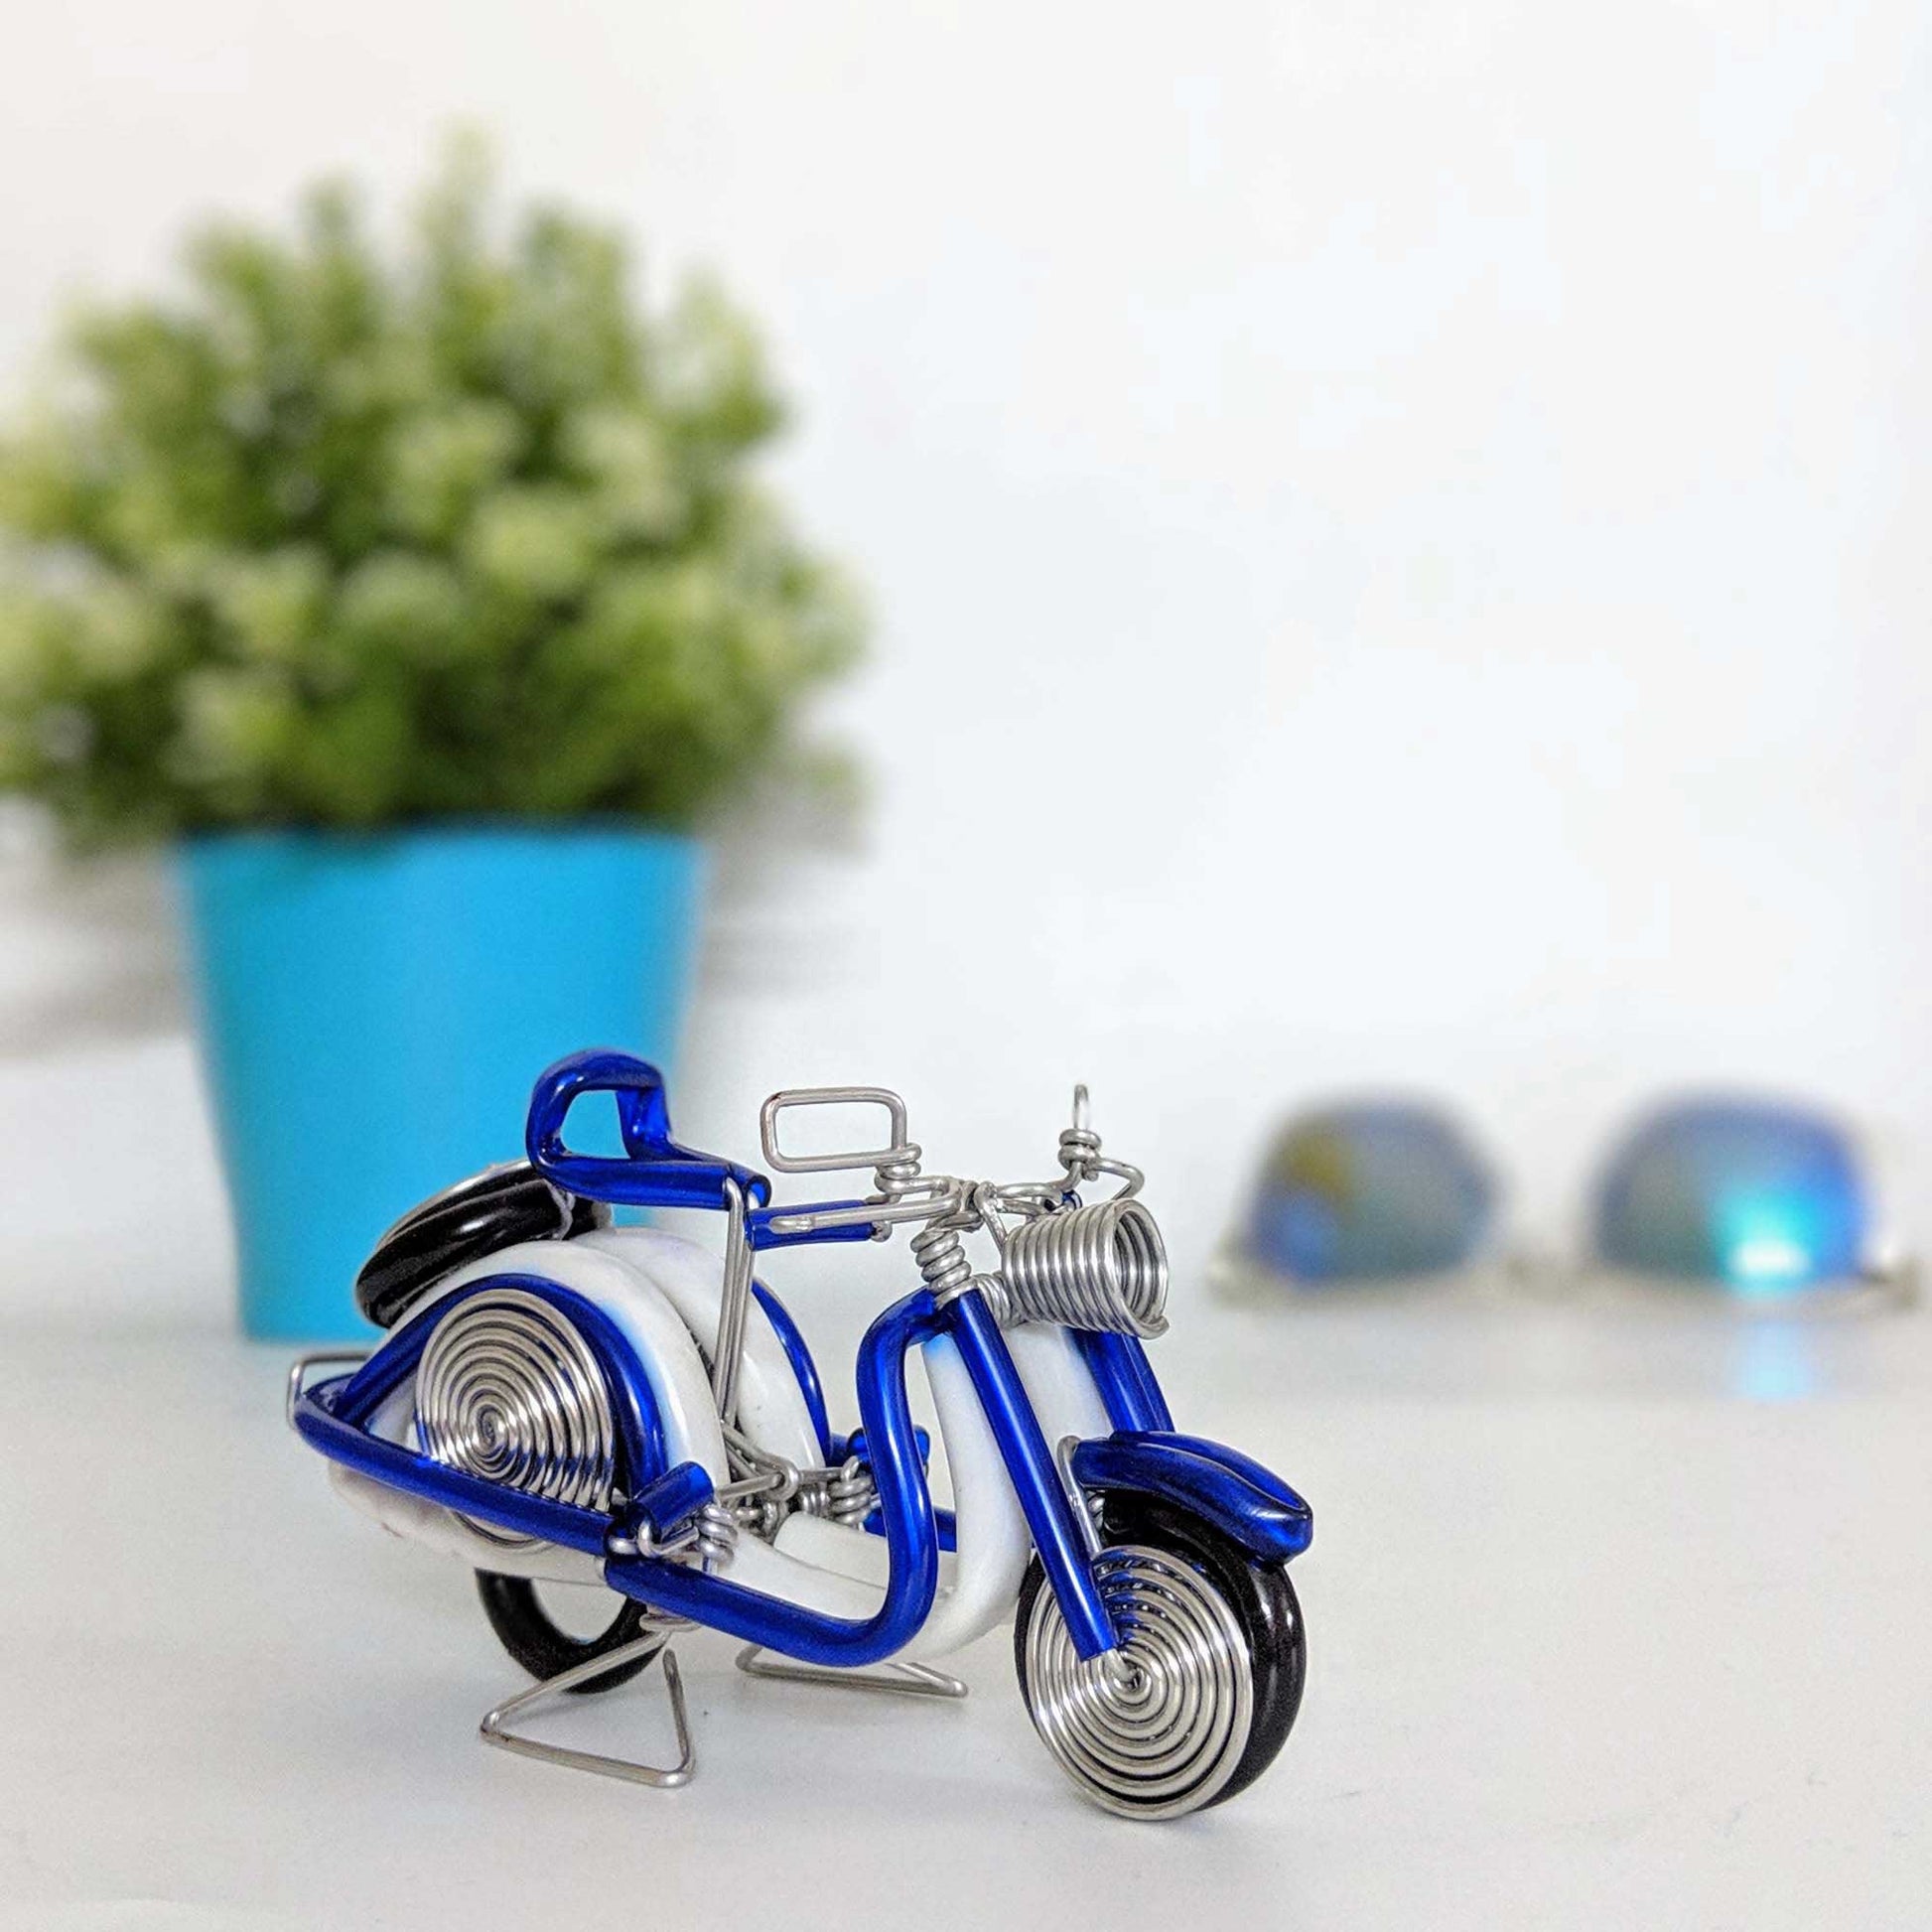 Miniature Wire Art Vespa Scooter hand-crafted from aluminium wire